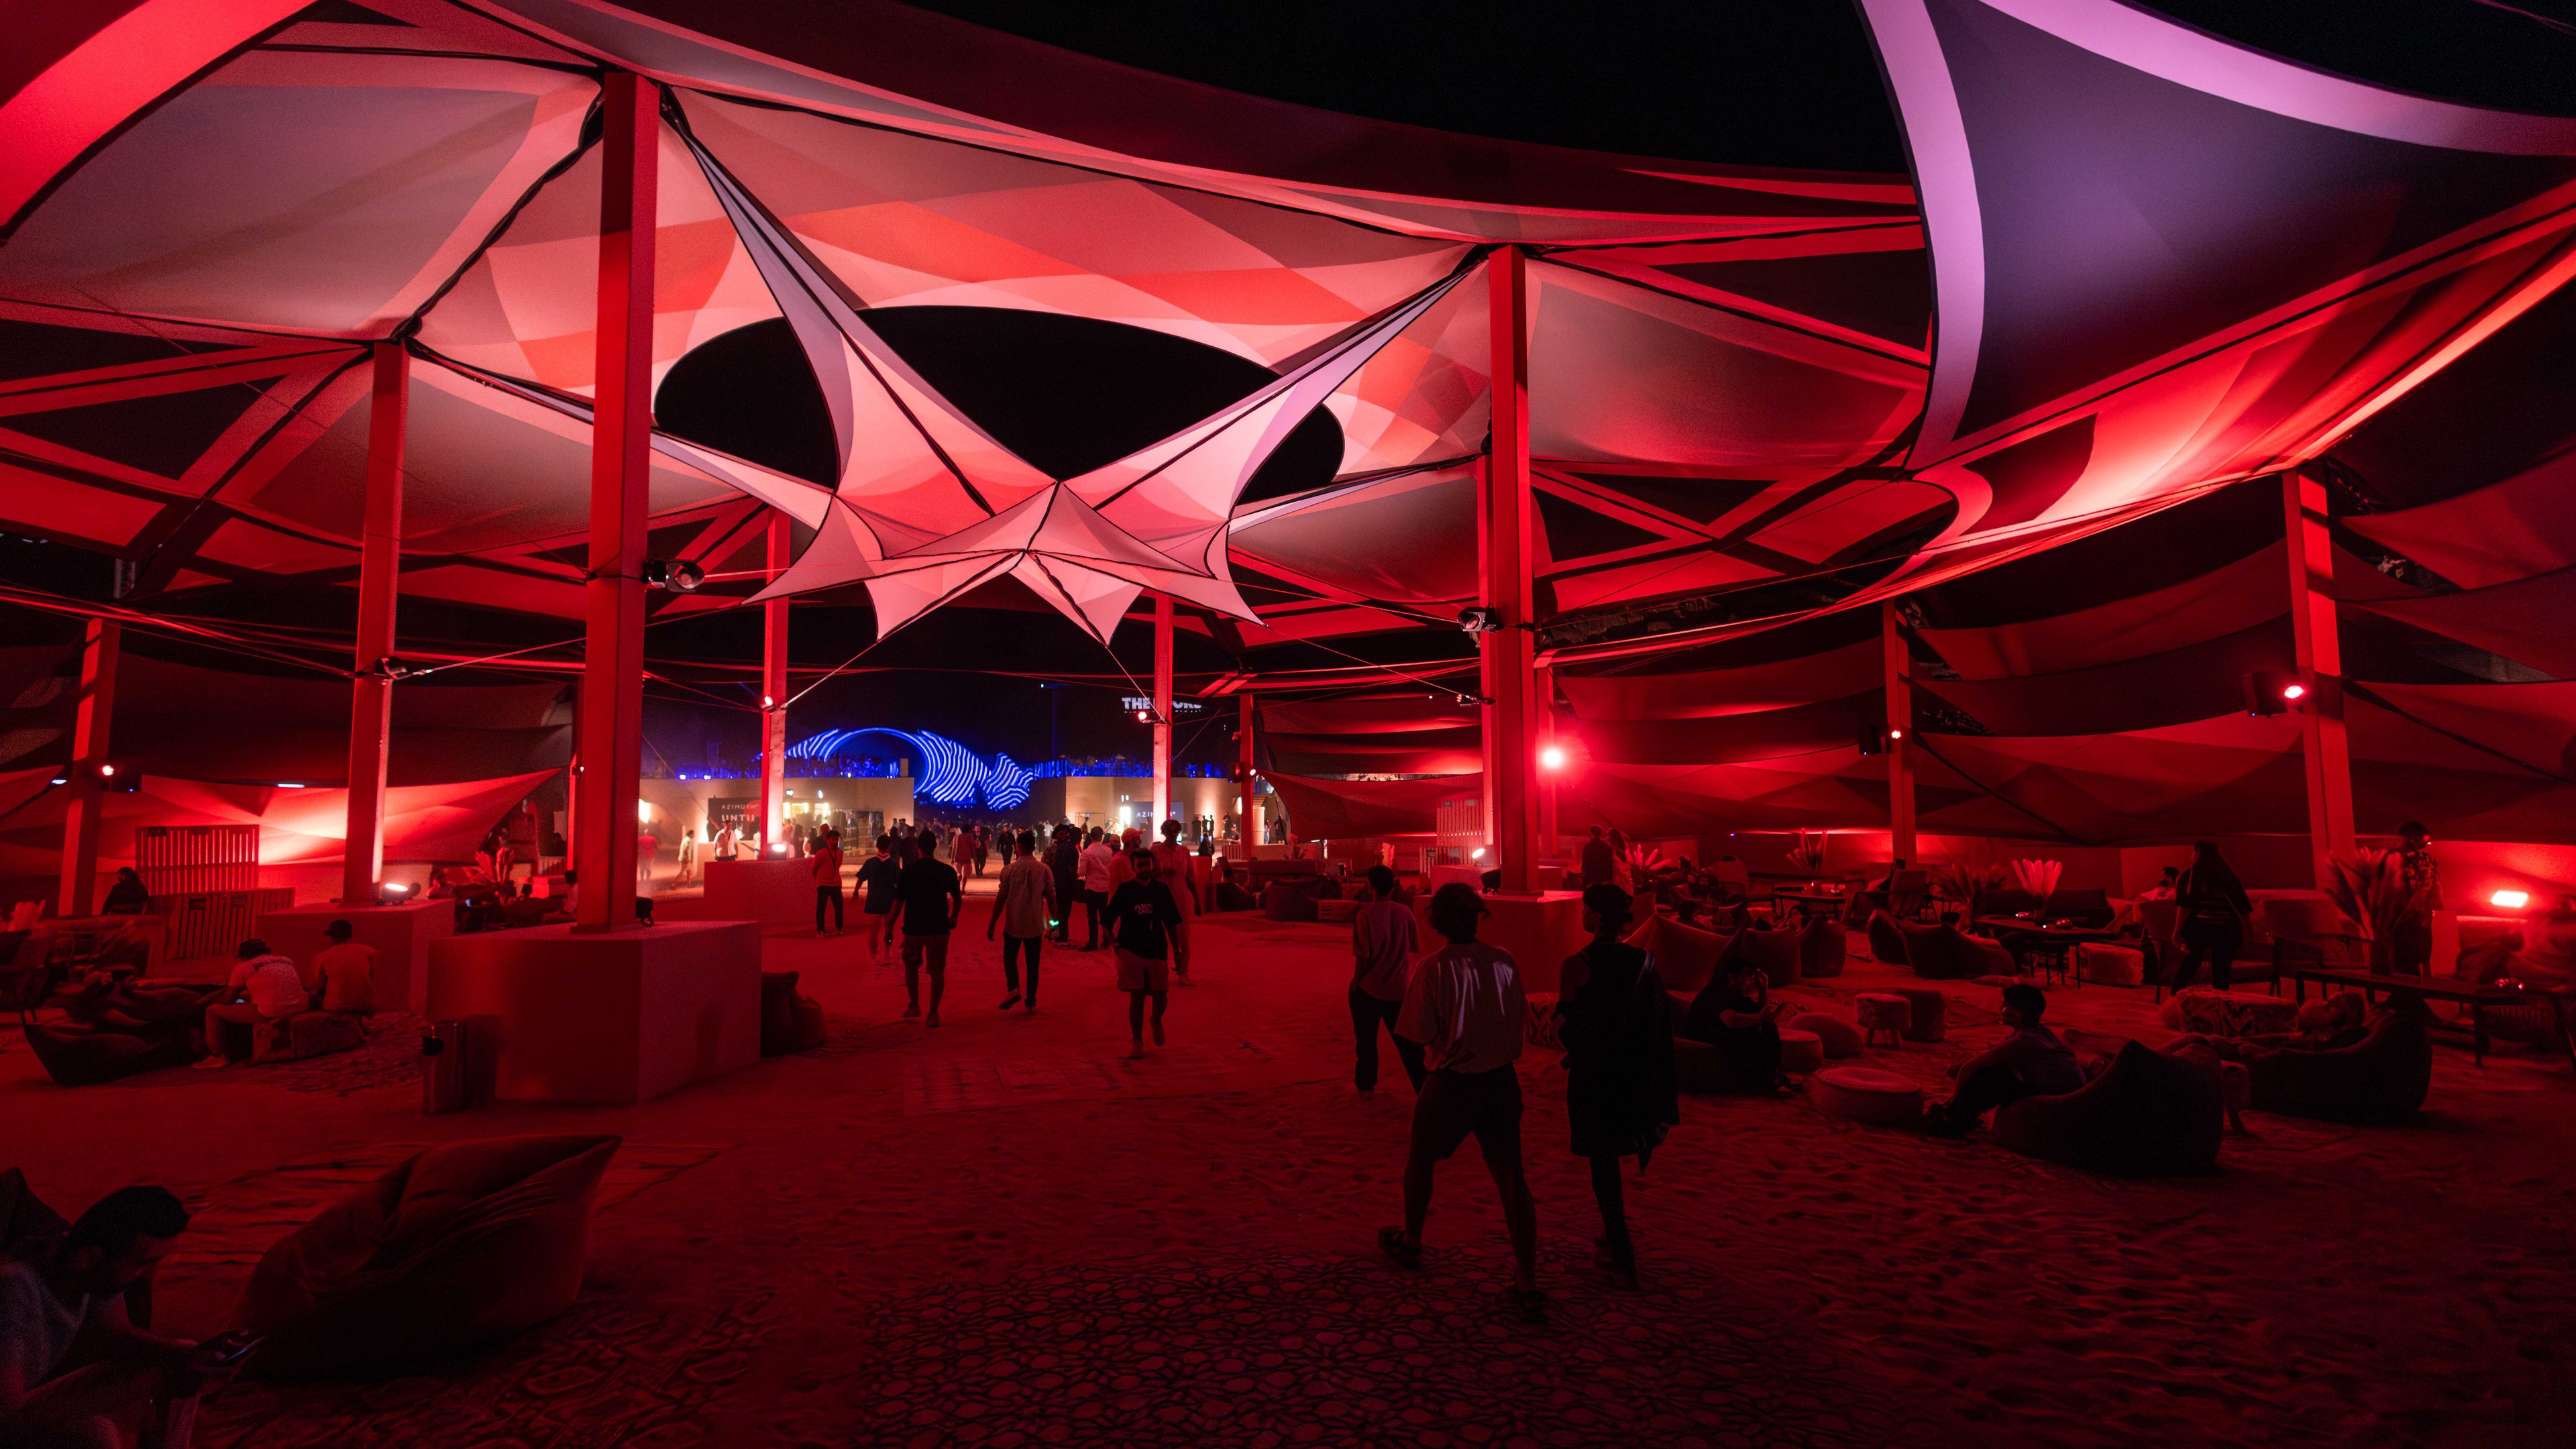 People walking underneath geometric structure with red lighting at night